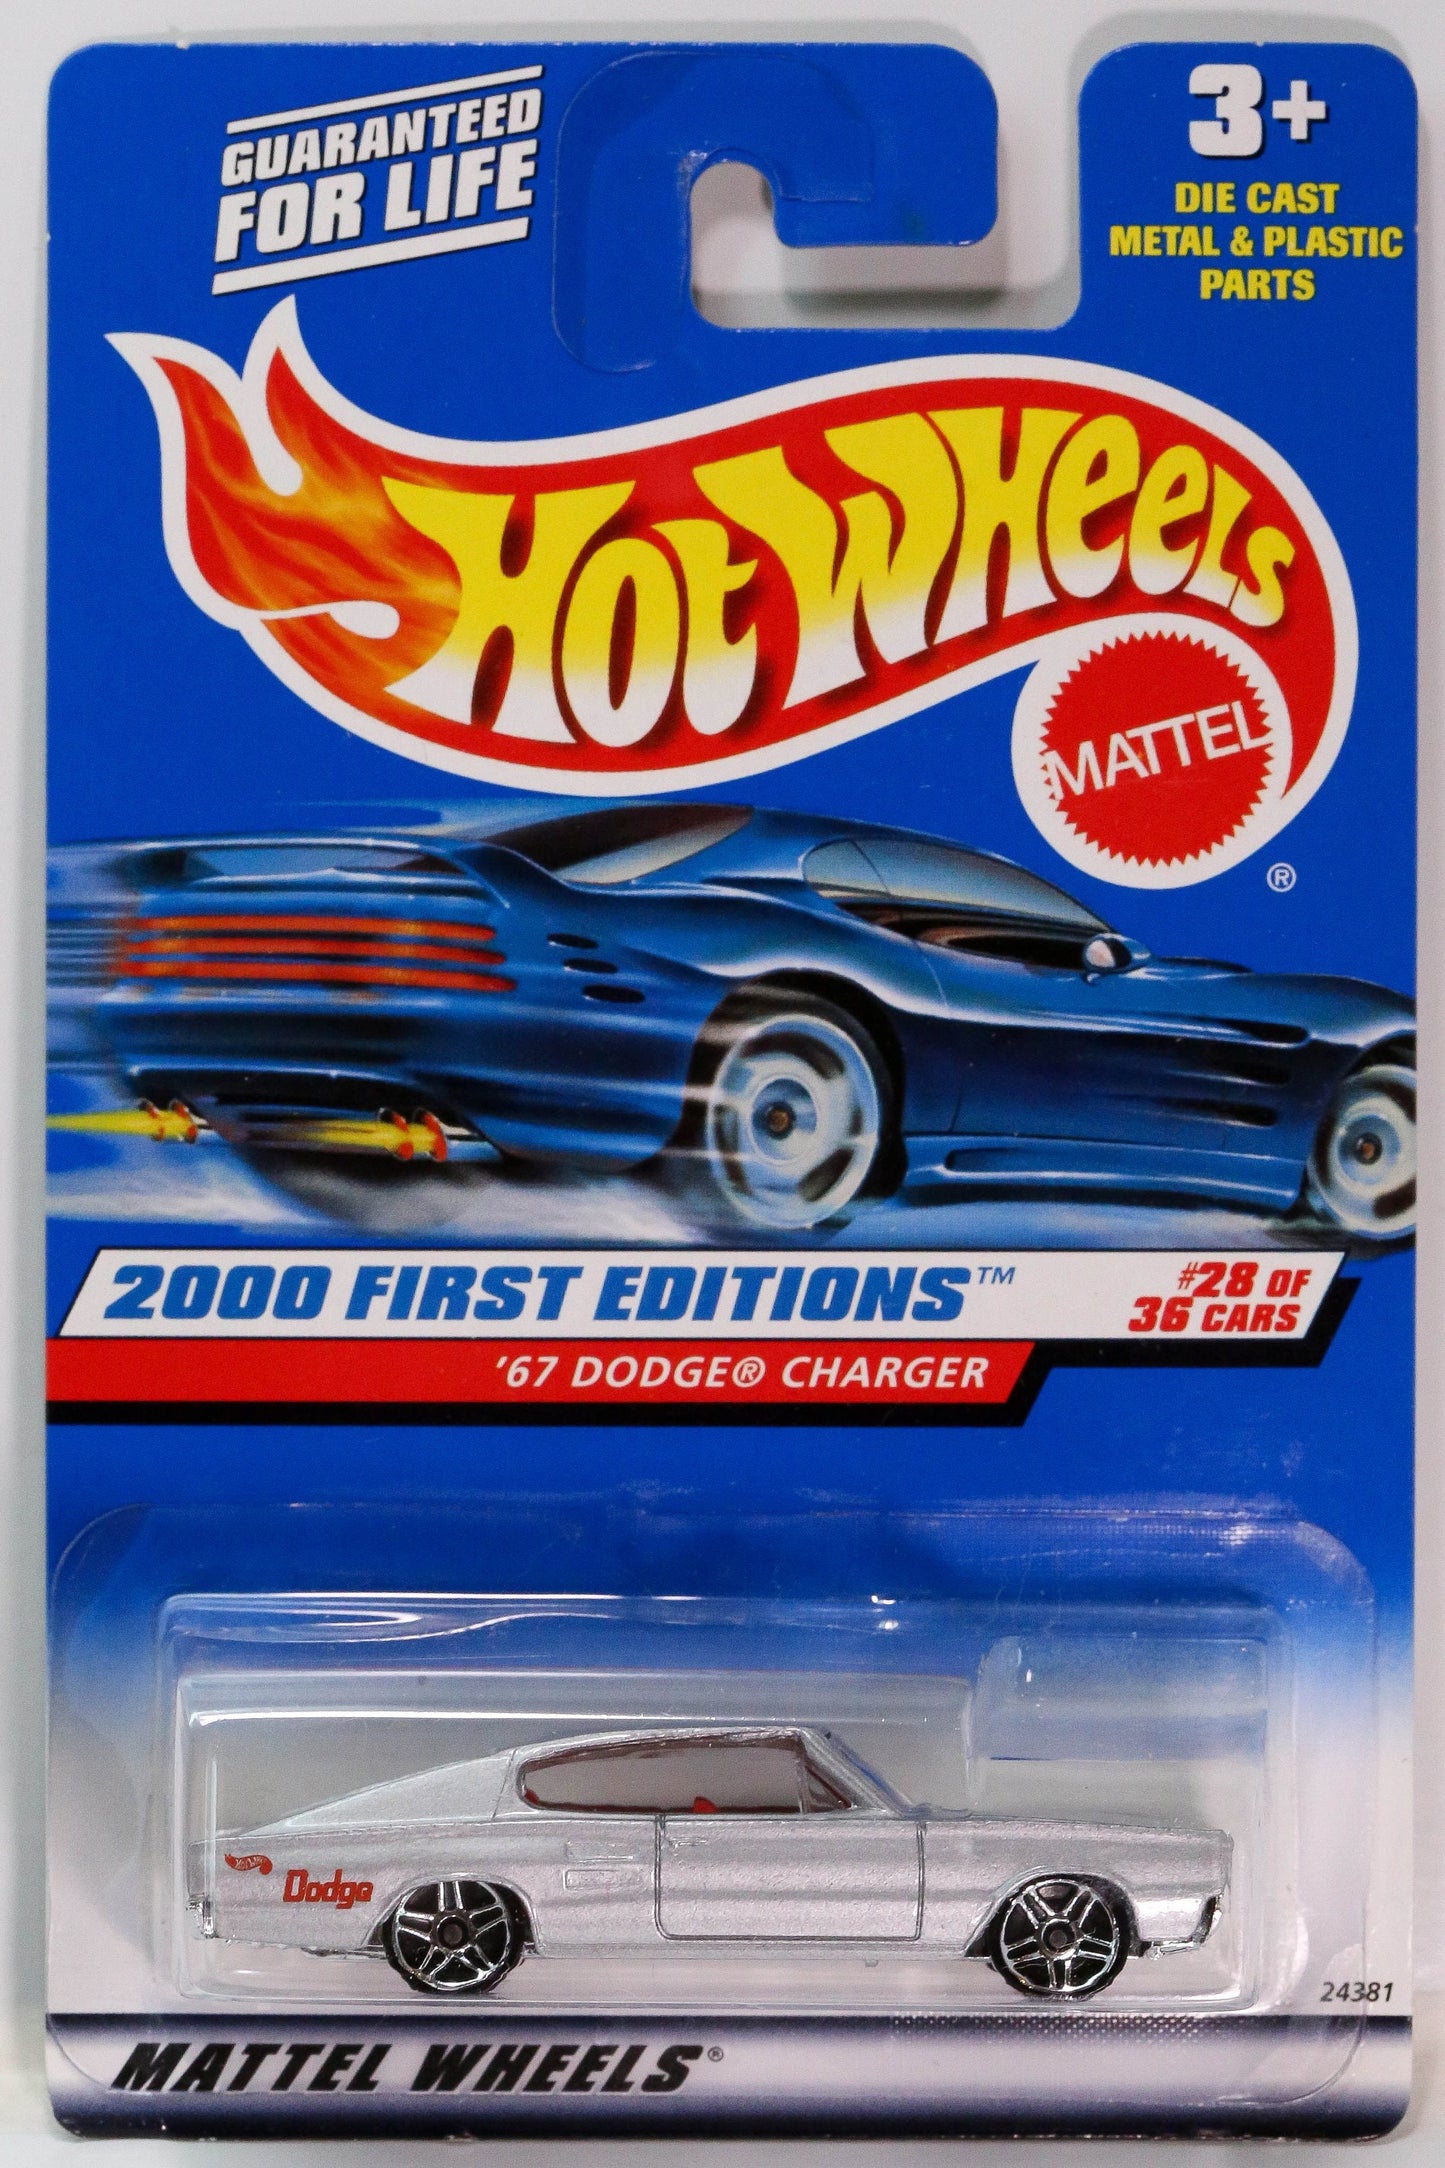 Vintage Hot Wheels '67 Dodge Charger - 2000 First Editions 24381 - Plus (+) a Bonus Hot Wheel